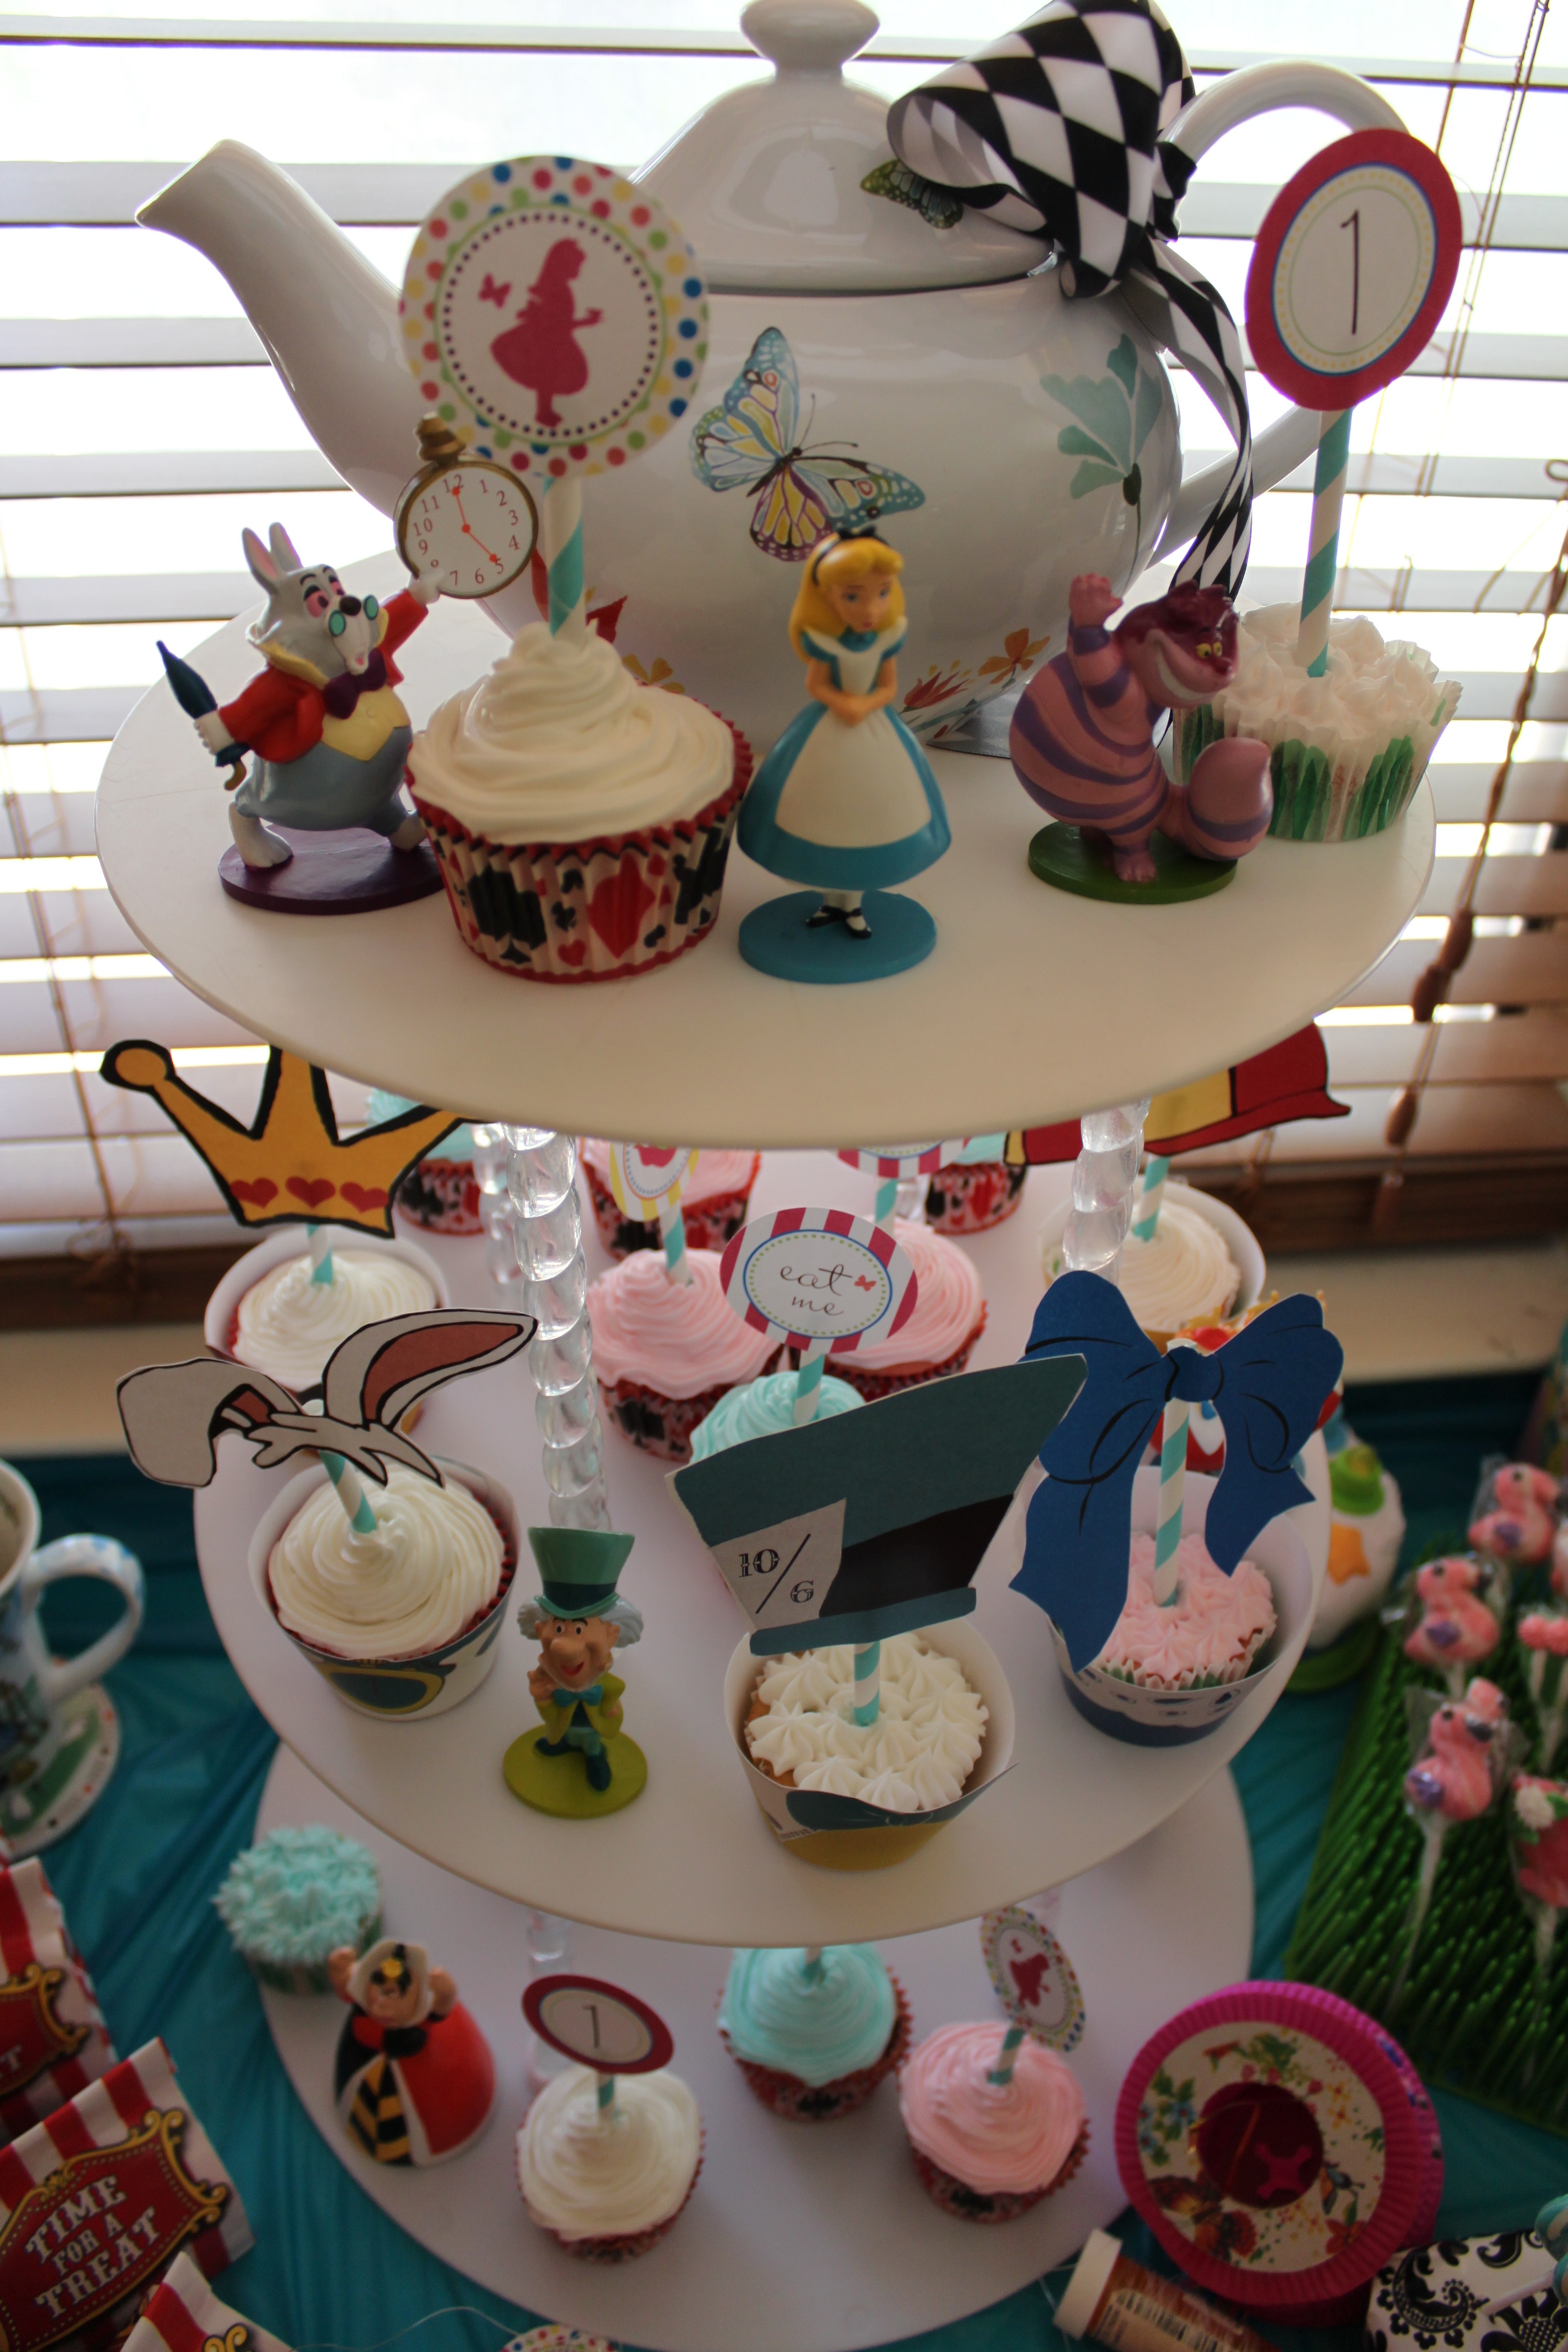  One  Year  Old  Birthday  Party  Alice in  One  derland Theme 